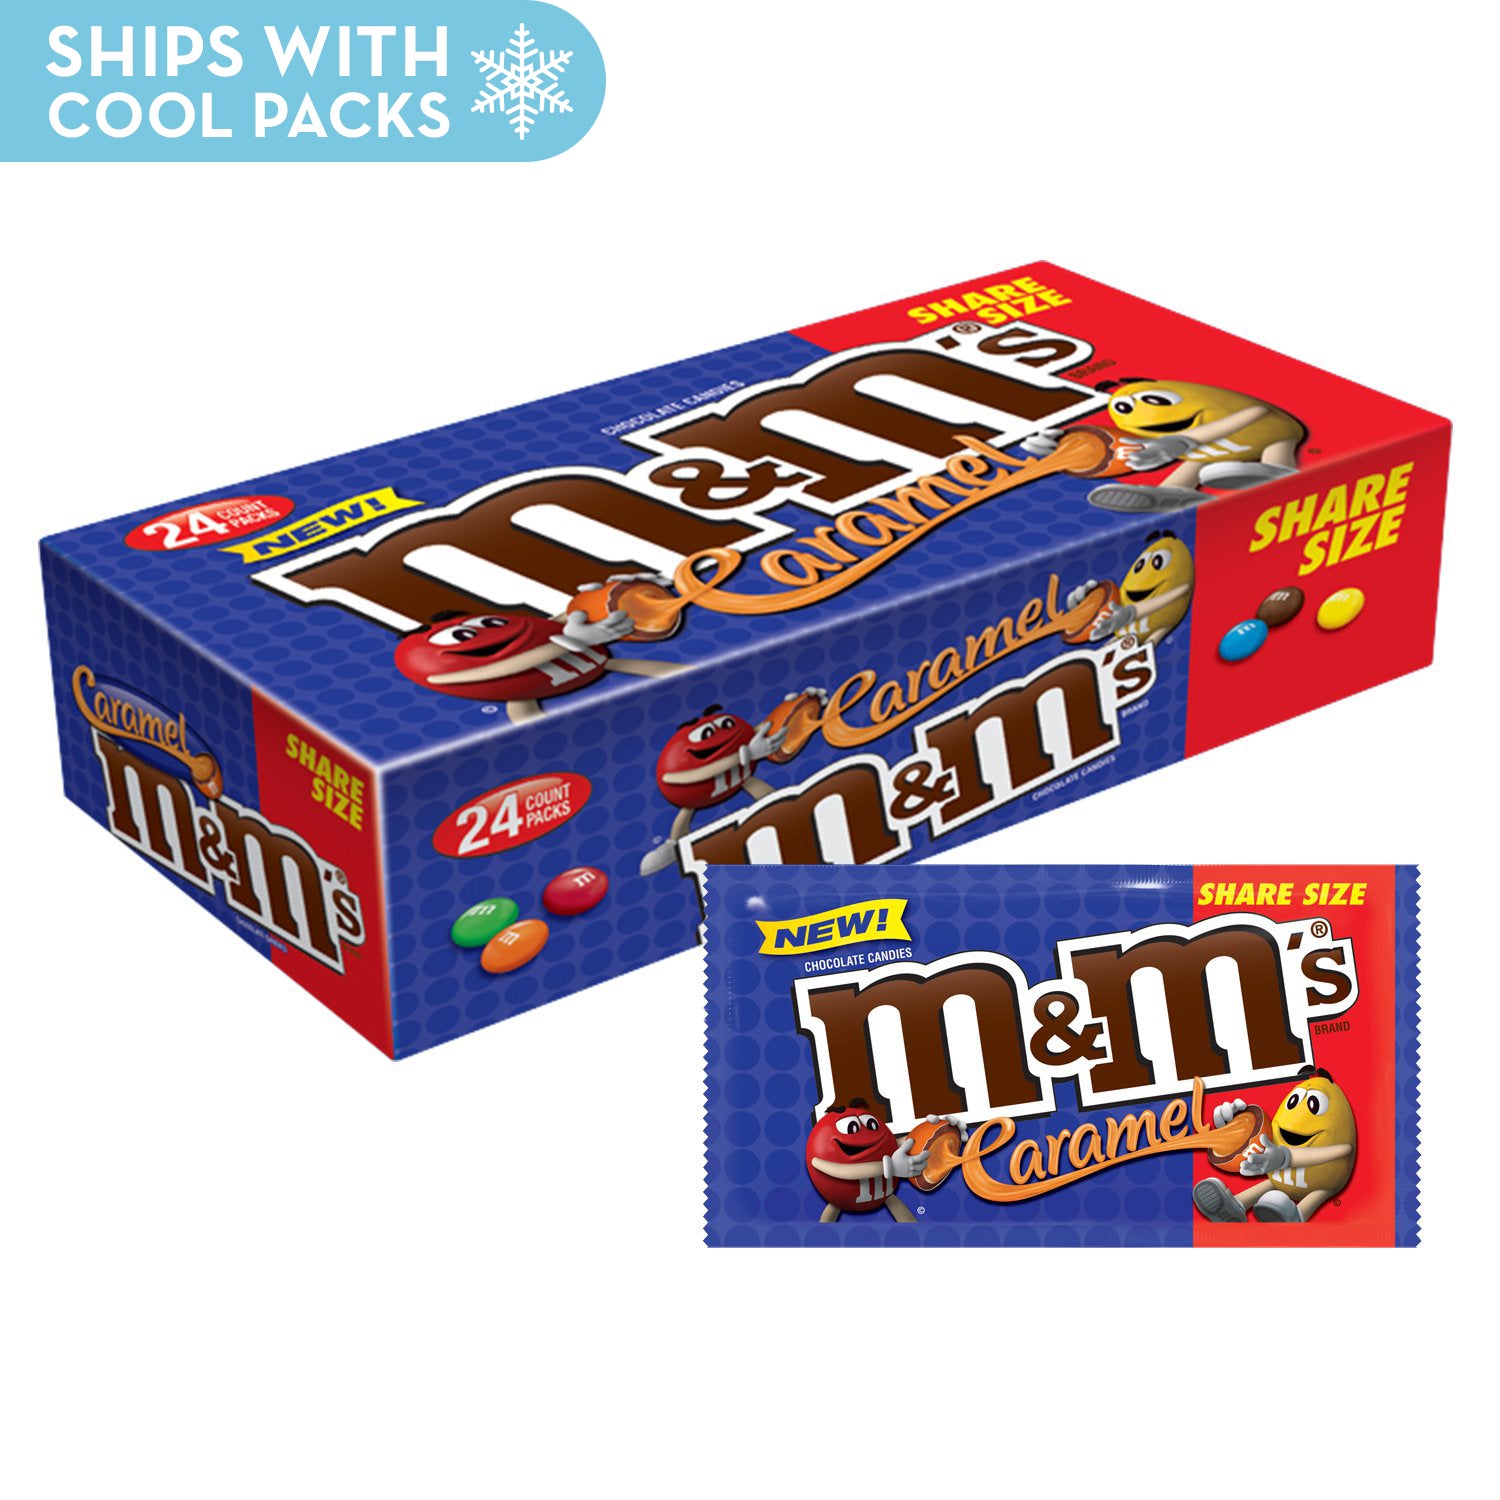 M&M'S Pretzel Chocolate Candy Sharing Size 2.83-Ounce Pouch 24-Count